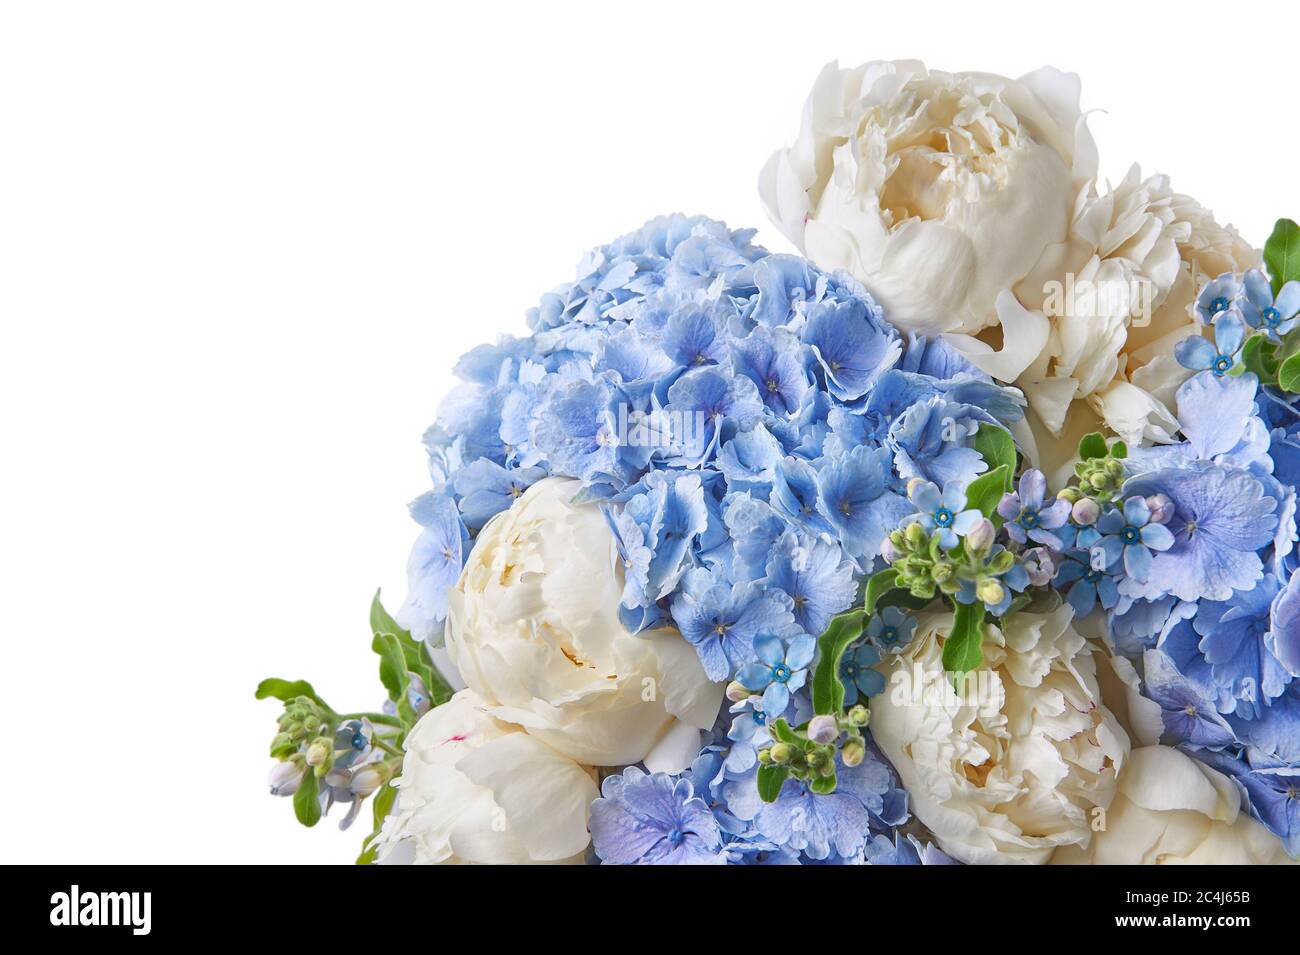 Background with beautiful white and blue flowers peonies. Stock Photo